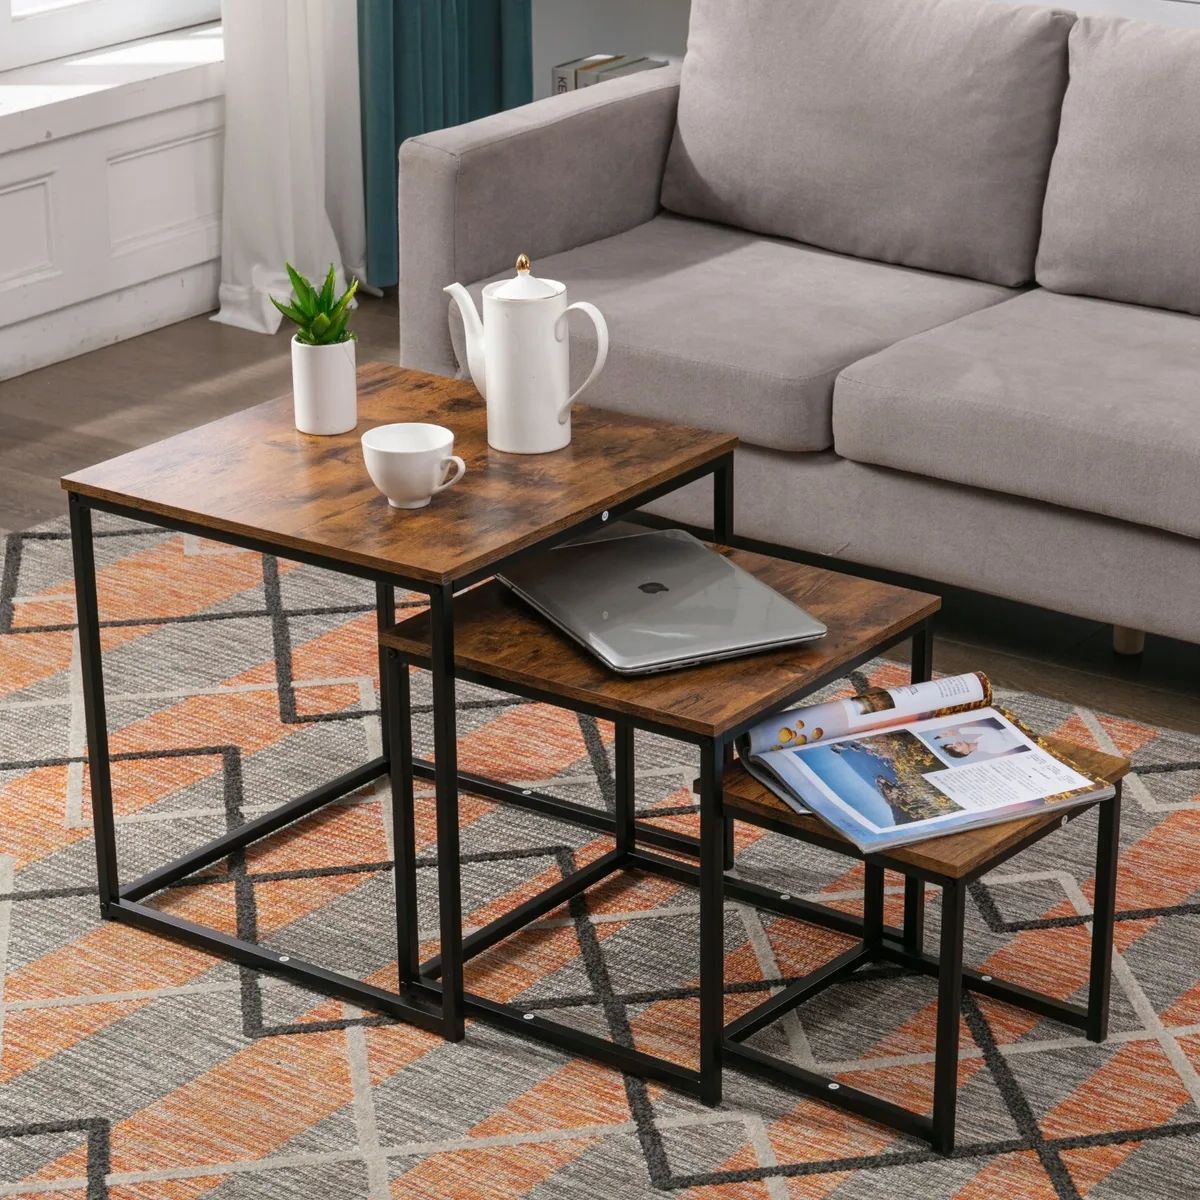 Newest Coffee Tables Of 3 Nesting Tables Pertaining To Nest Coffee Table 3 In 1 Set Compact Modern Design For Space Saving For Any  Room (Photo 10 of 10)